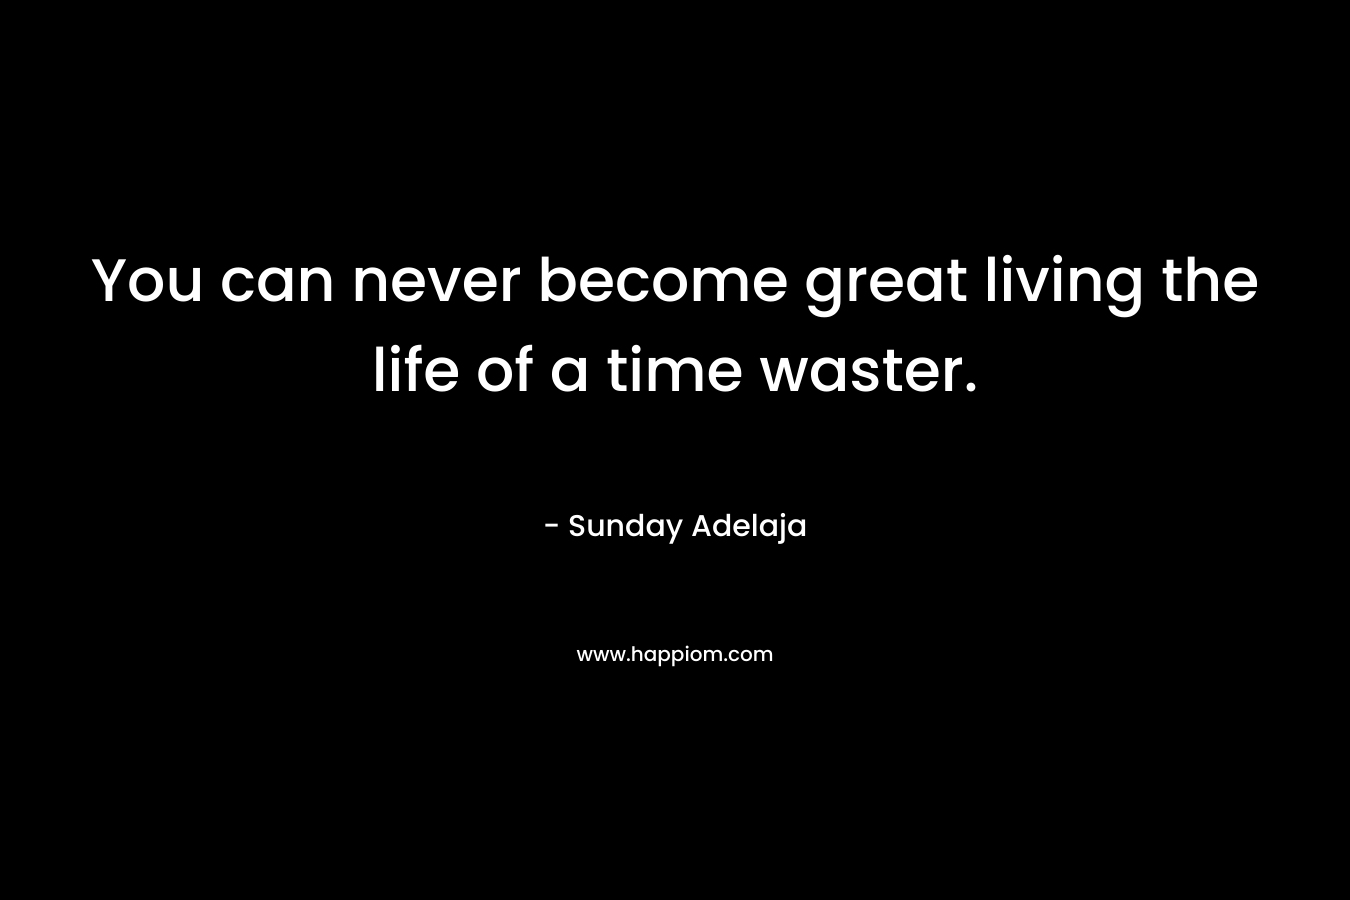 You can never become great living the life of a time waster.